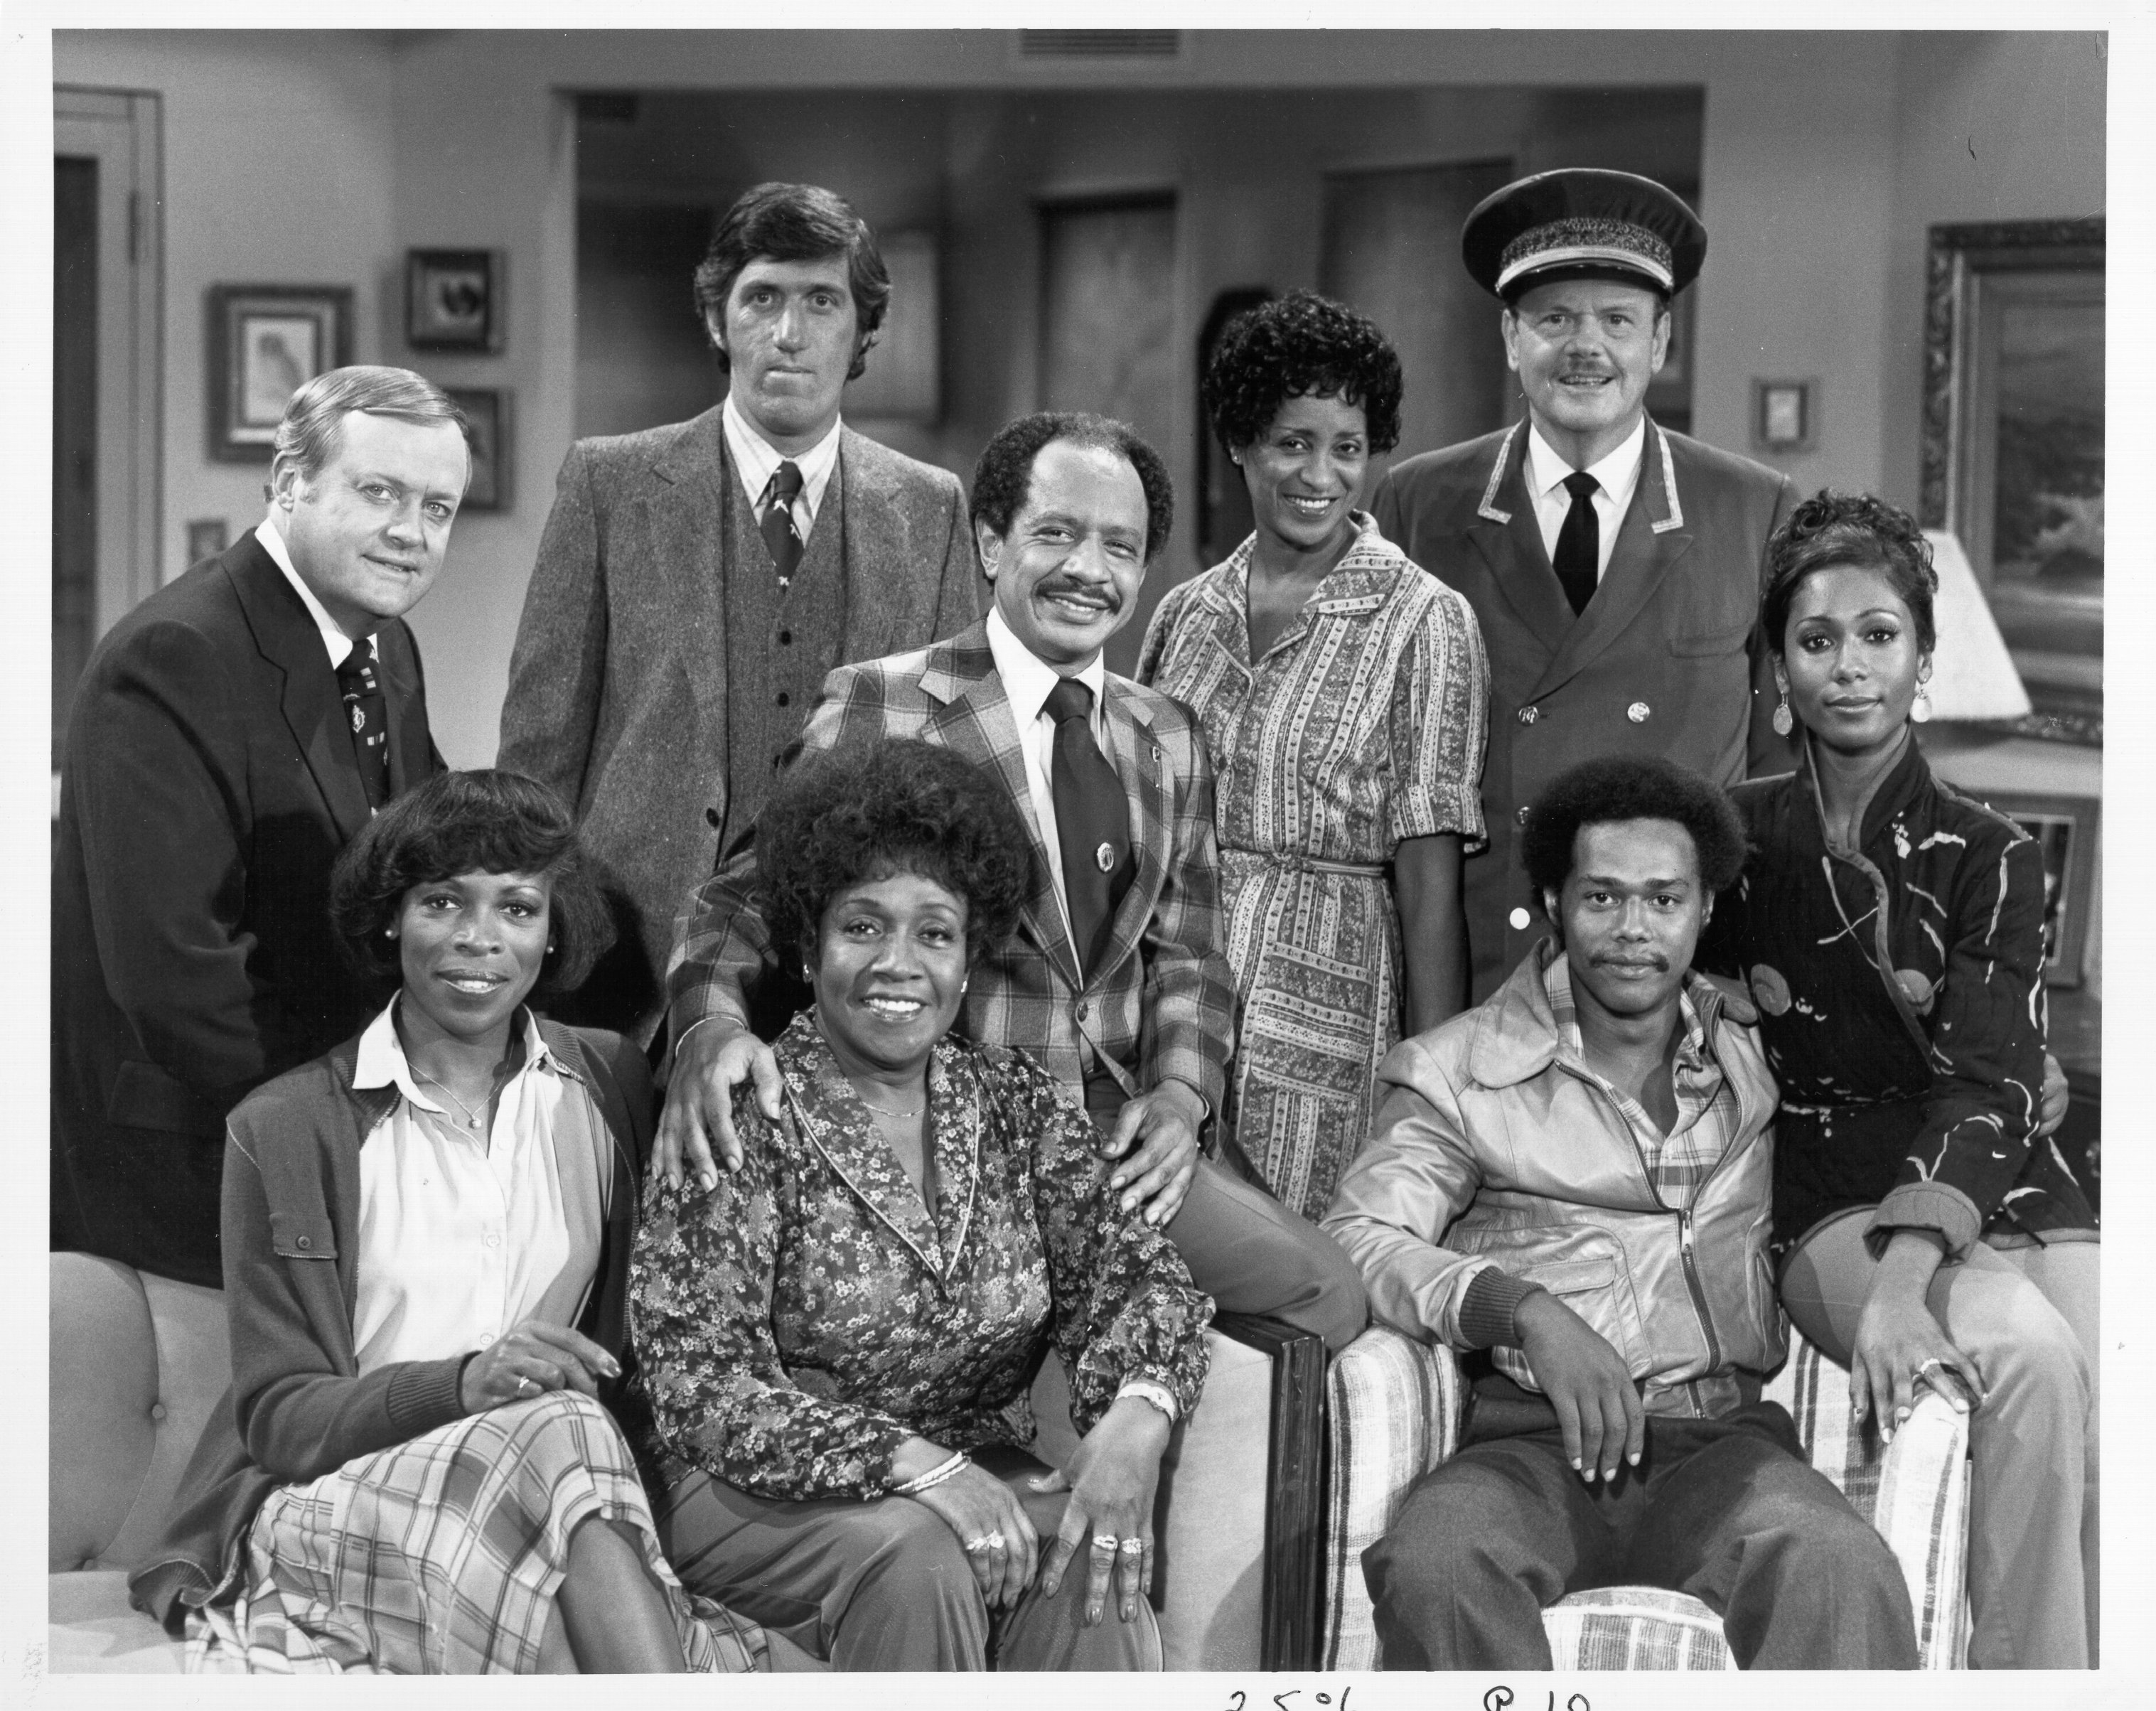 Franklin Cover, Paul Benedict, Sherman Hemsley, Marla Gibbs, Ned Wertimer, Berlinda Tolbert, Roxie Roker, Isabel Sanford, and Mike Evans from "The Jeffersons" in 1975 in Los Angeles, California | Photo: Michael Ochs Archives/Getty Images